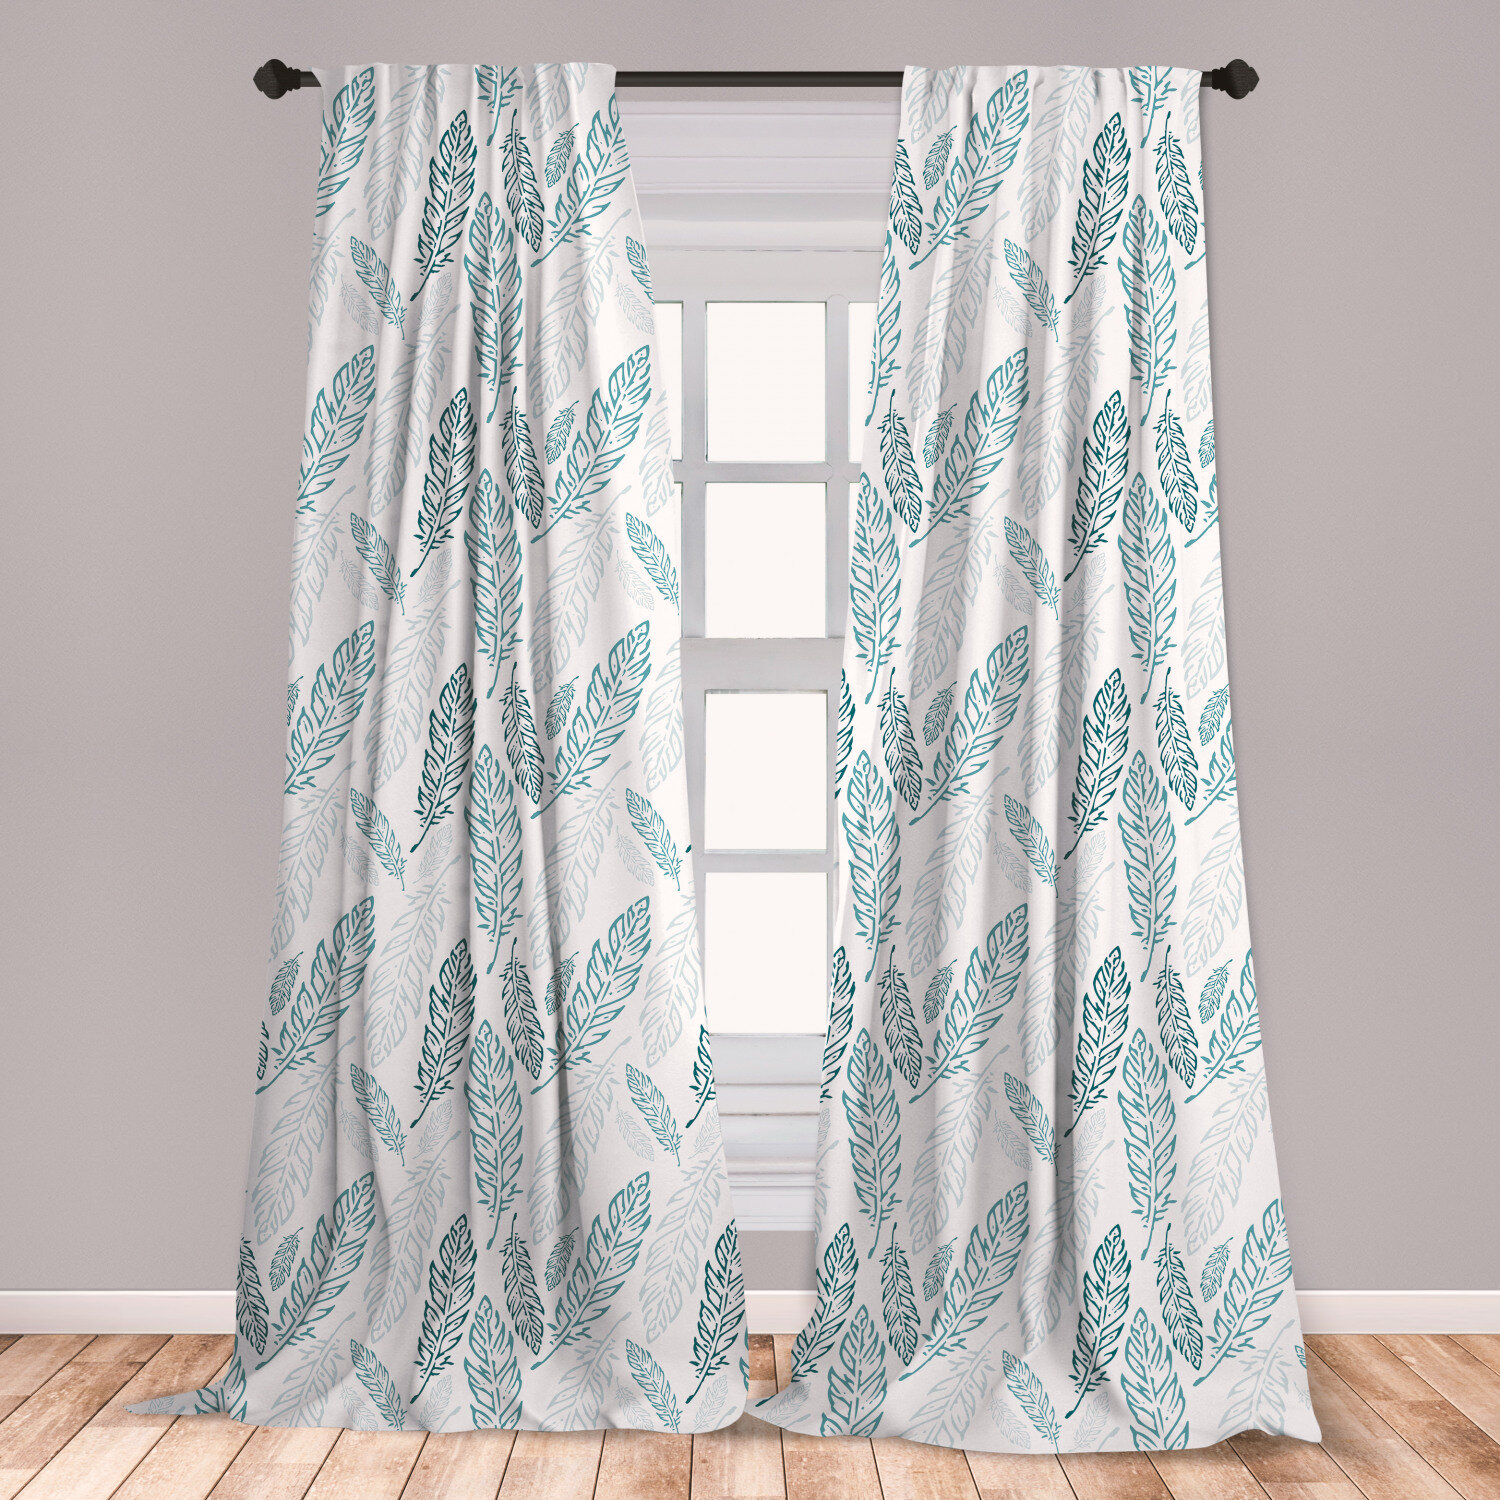 East Urban Home Ambesonne Teal And White Curtains